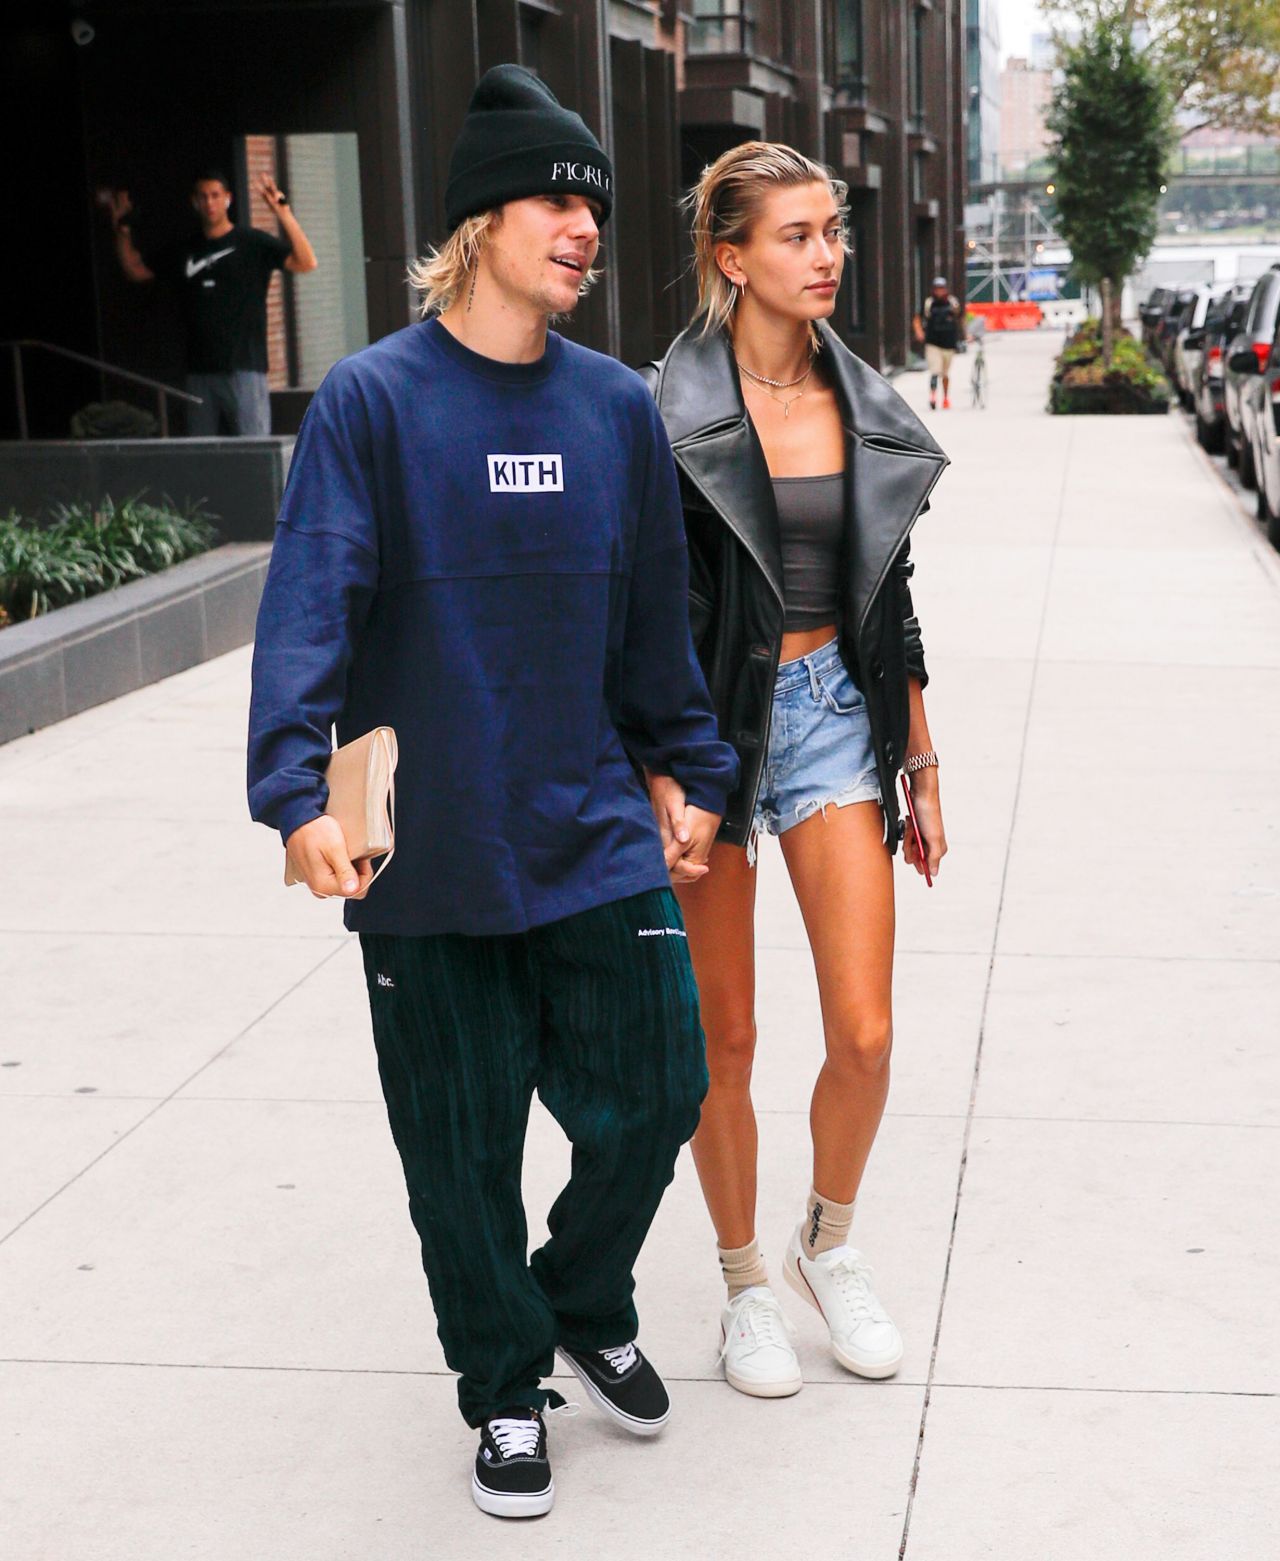 hailey-baldwin-and-justin-bieber-obtained-their-marriage-license-in-nyc-09-14-2018-1.jpg